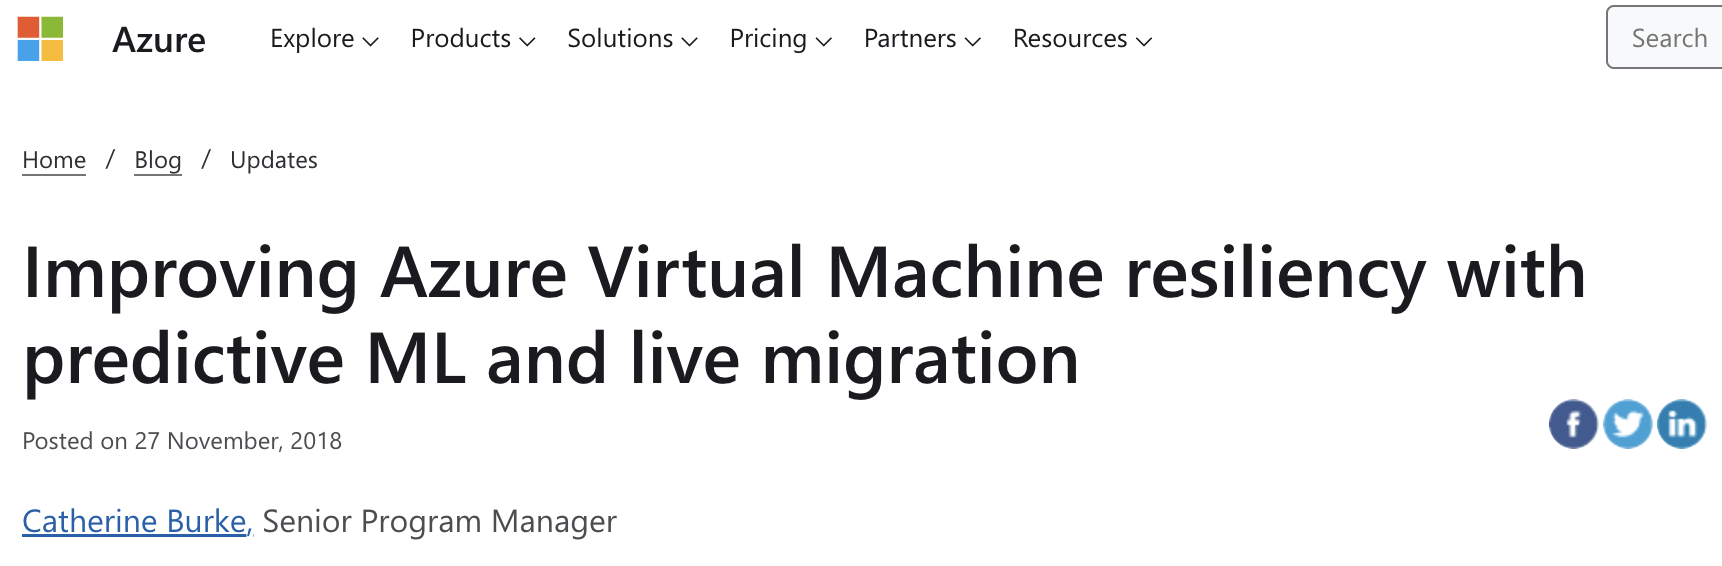 Improving Azure Virtual Machine resiliency with predictive ML and live migration